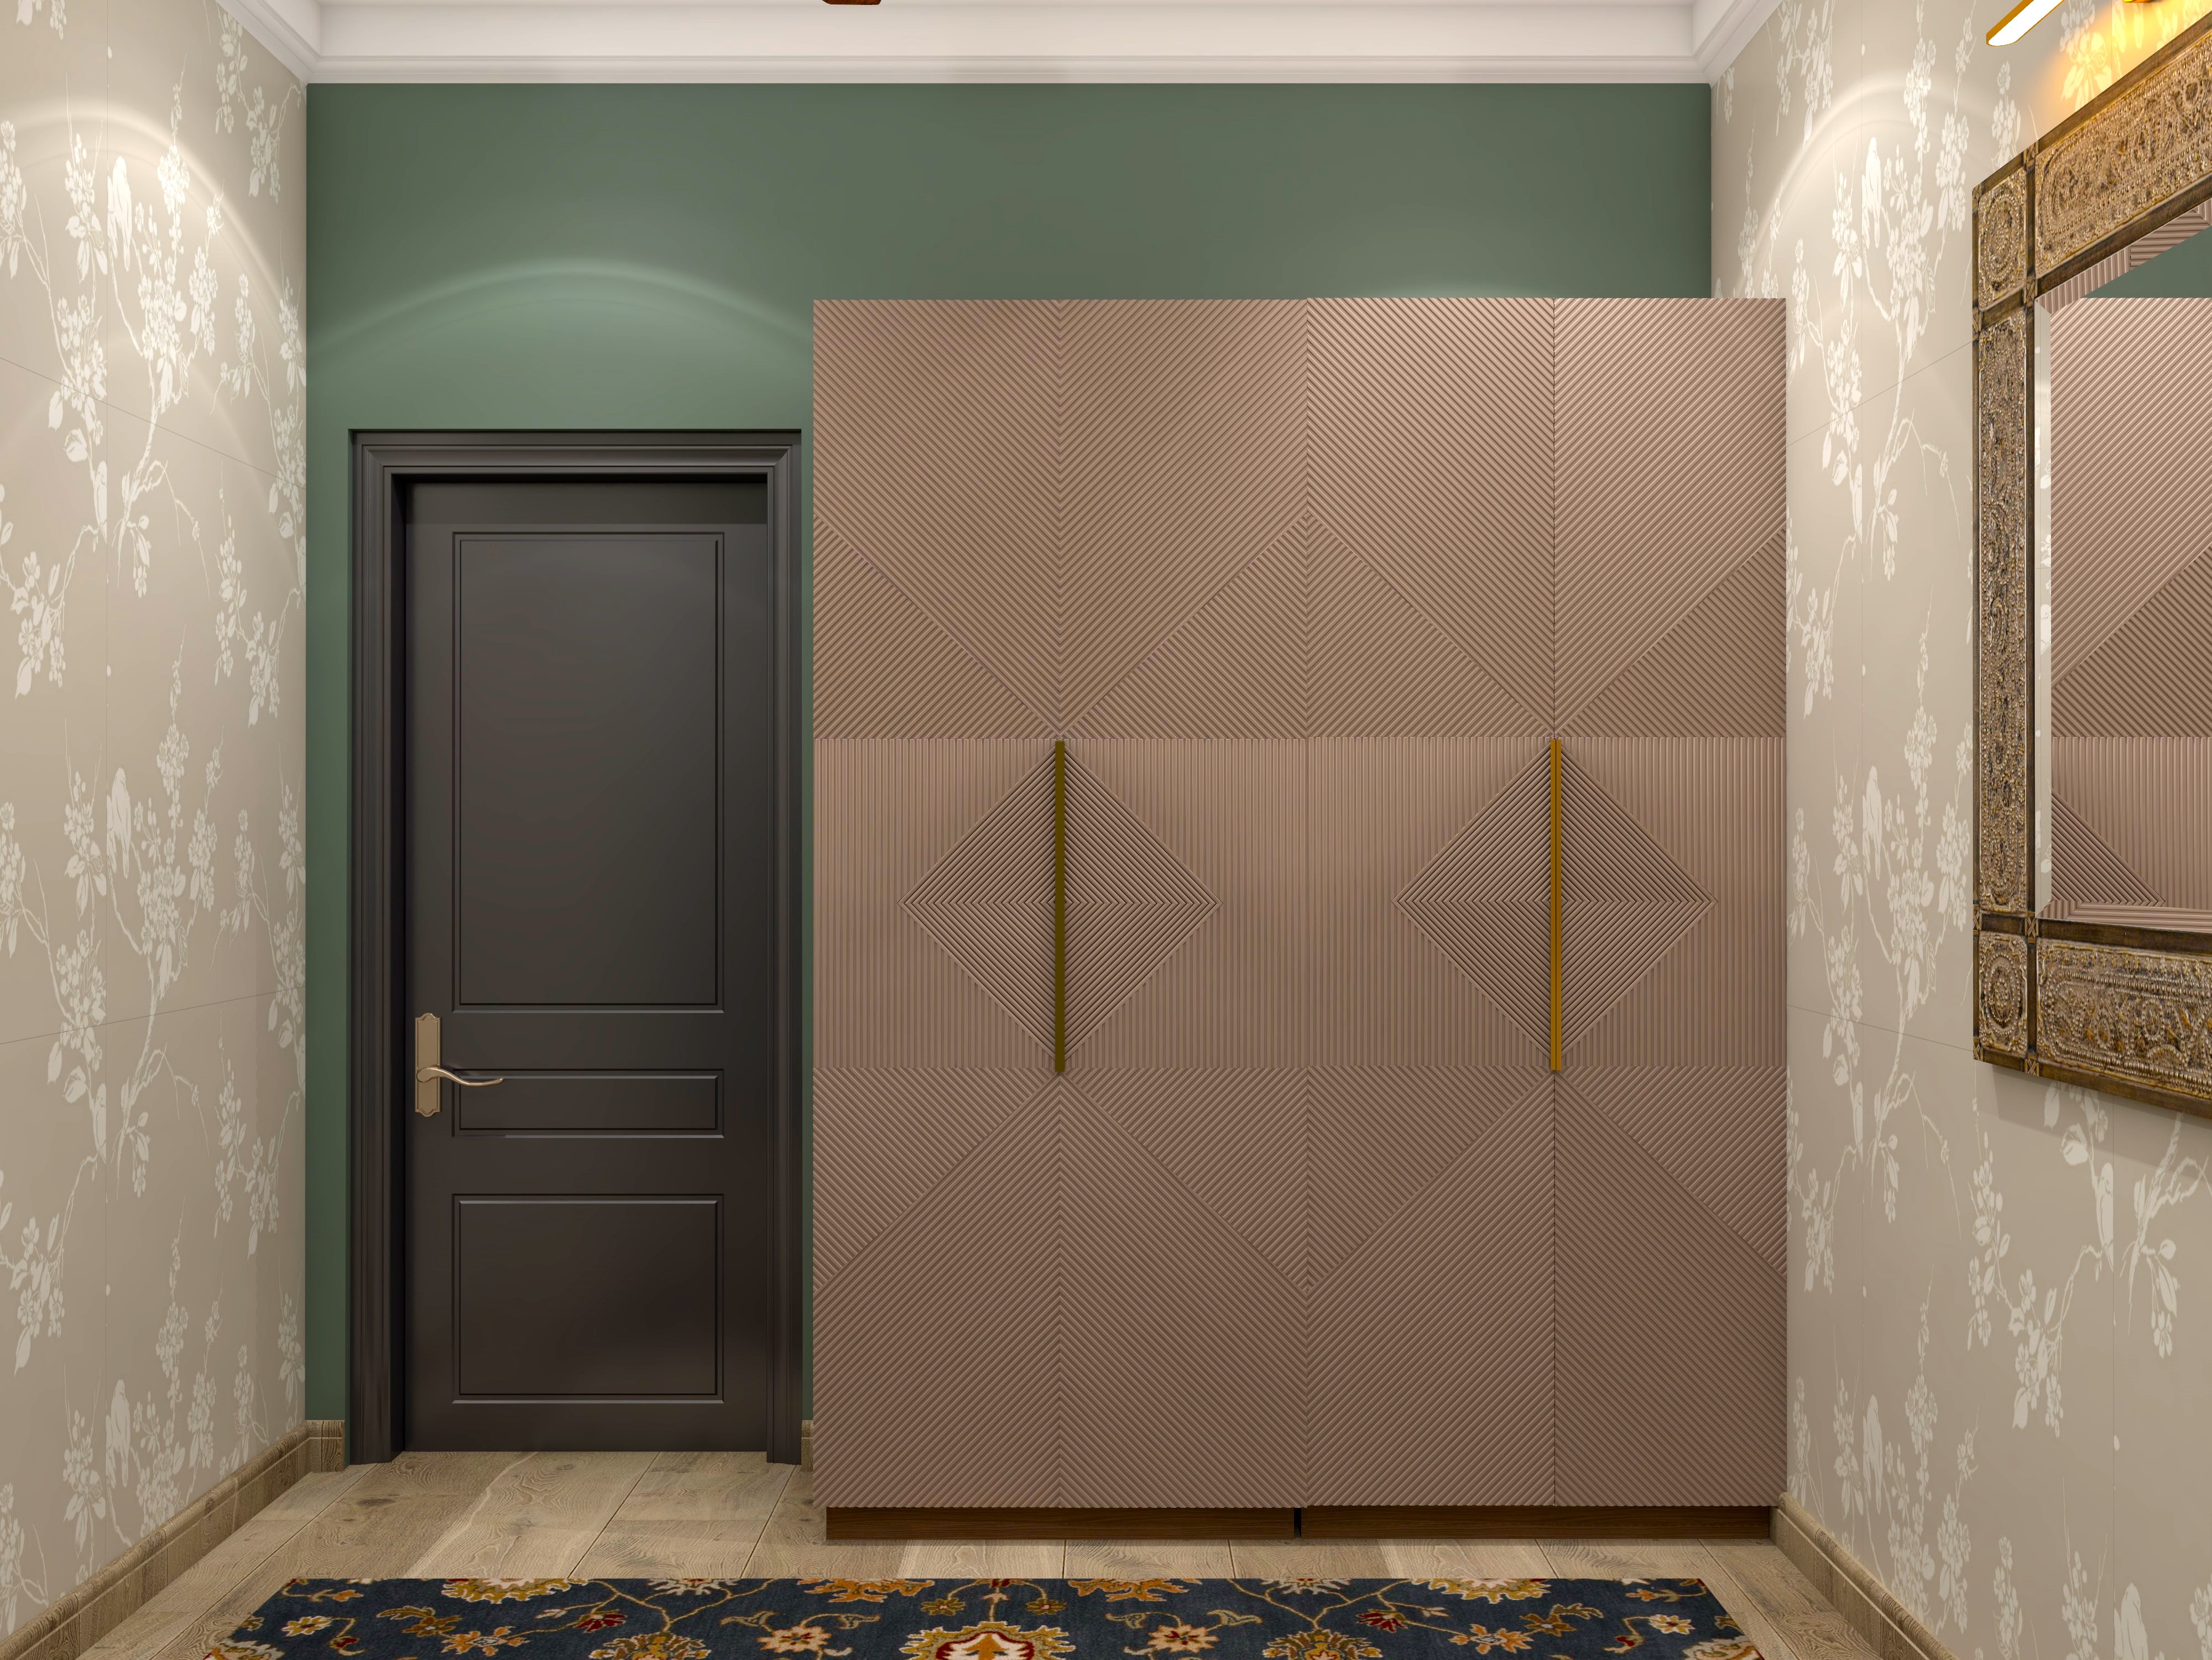 Swing wardrobe with rose gold 3d laminate against green wall-Beautiful Homes